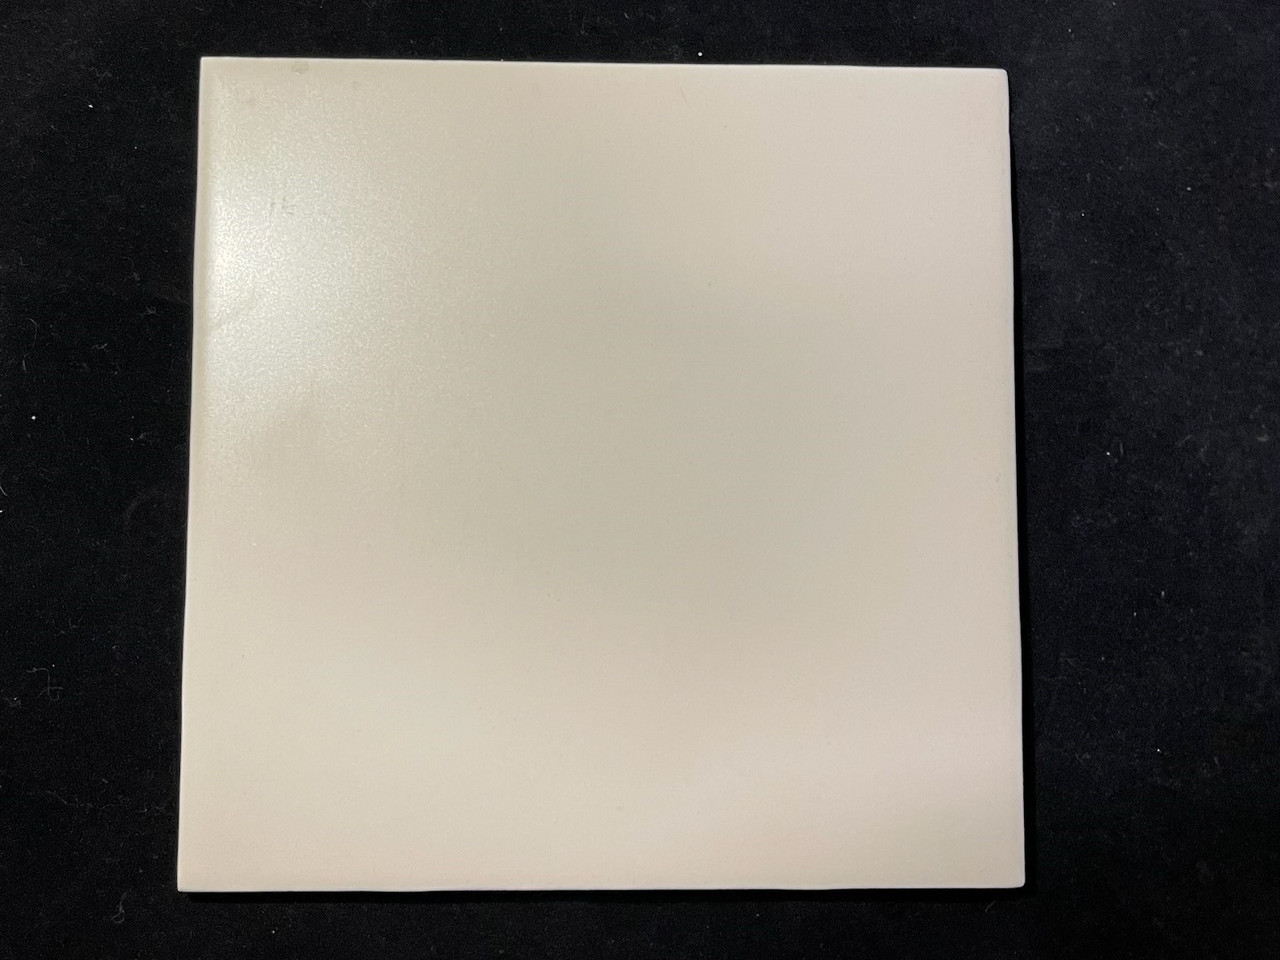 Cream 6x6 Tile Matte Finish Wall Tile  |By the Pallet|